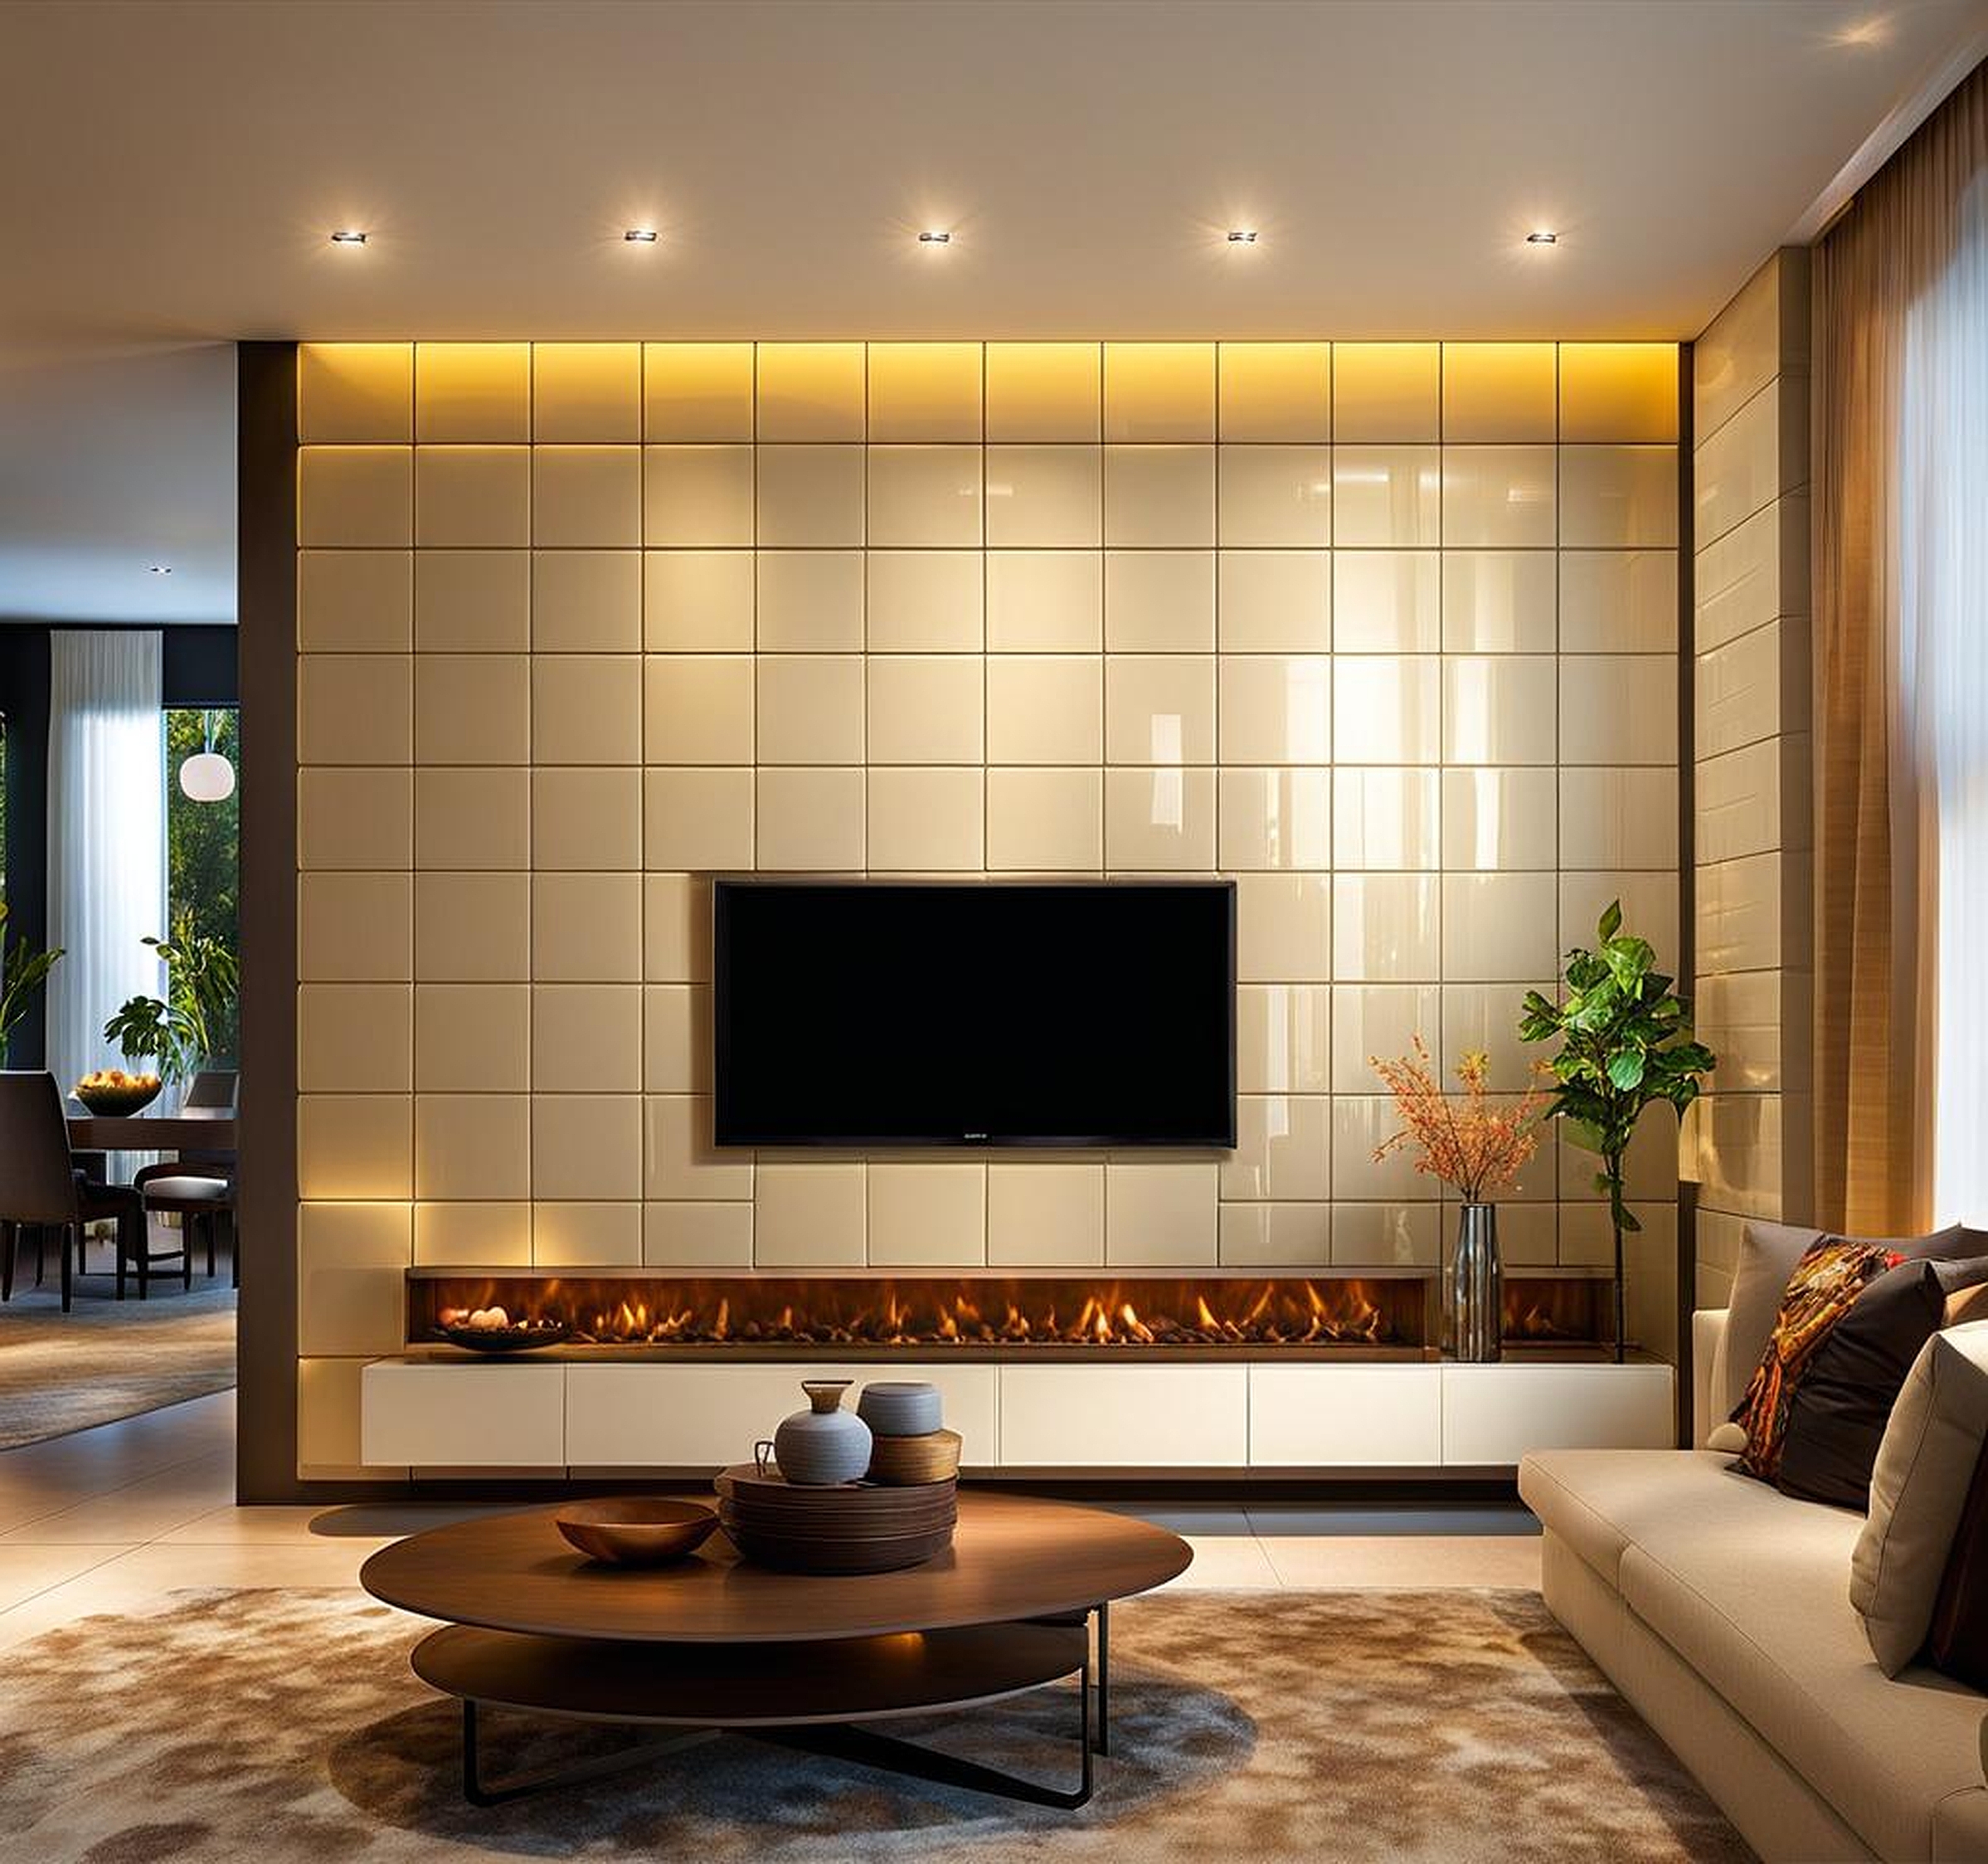 A Beginners Guide to Tiling Your Living Room Walls with Tile